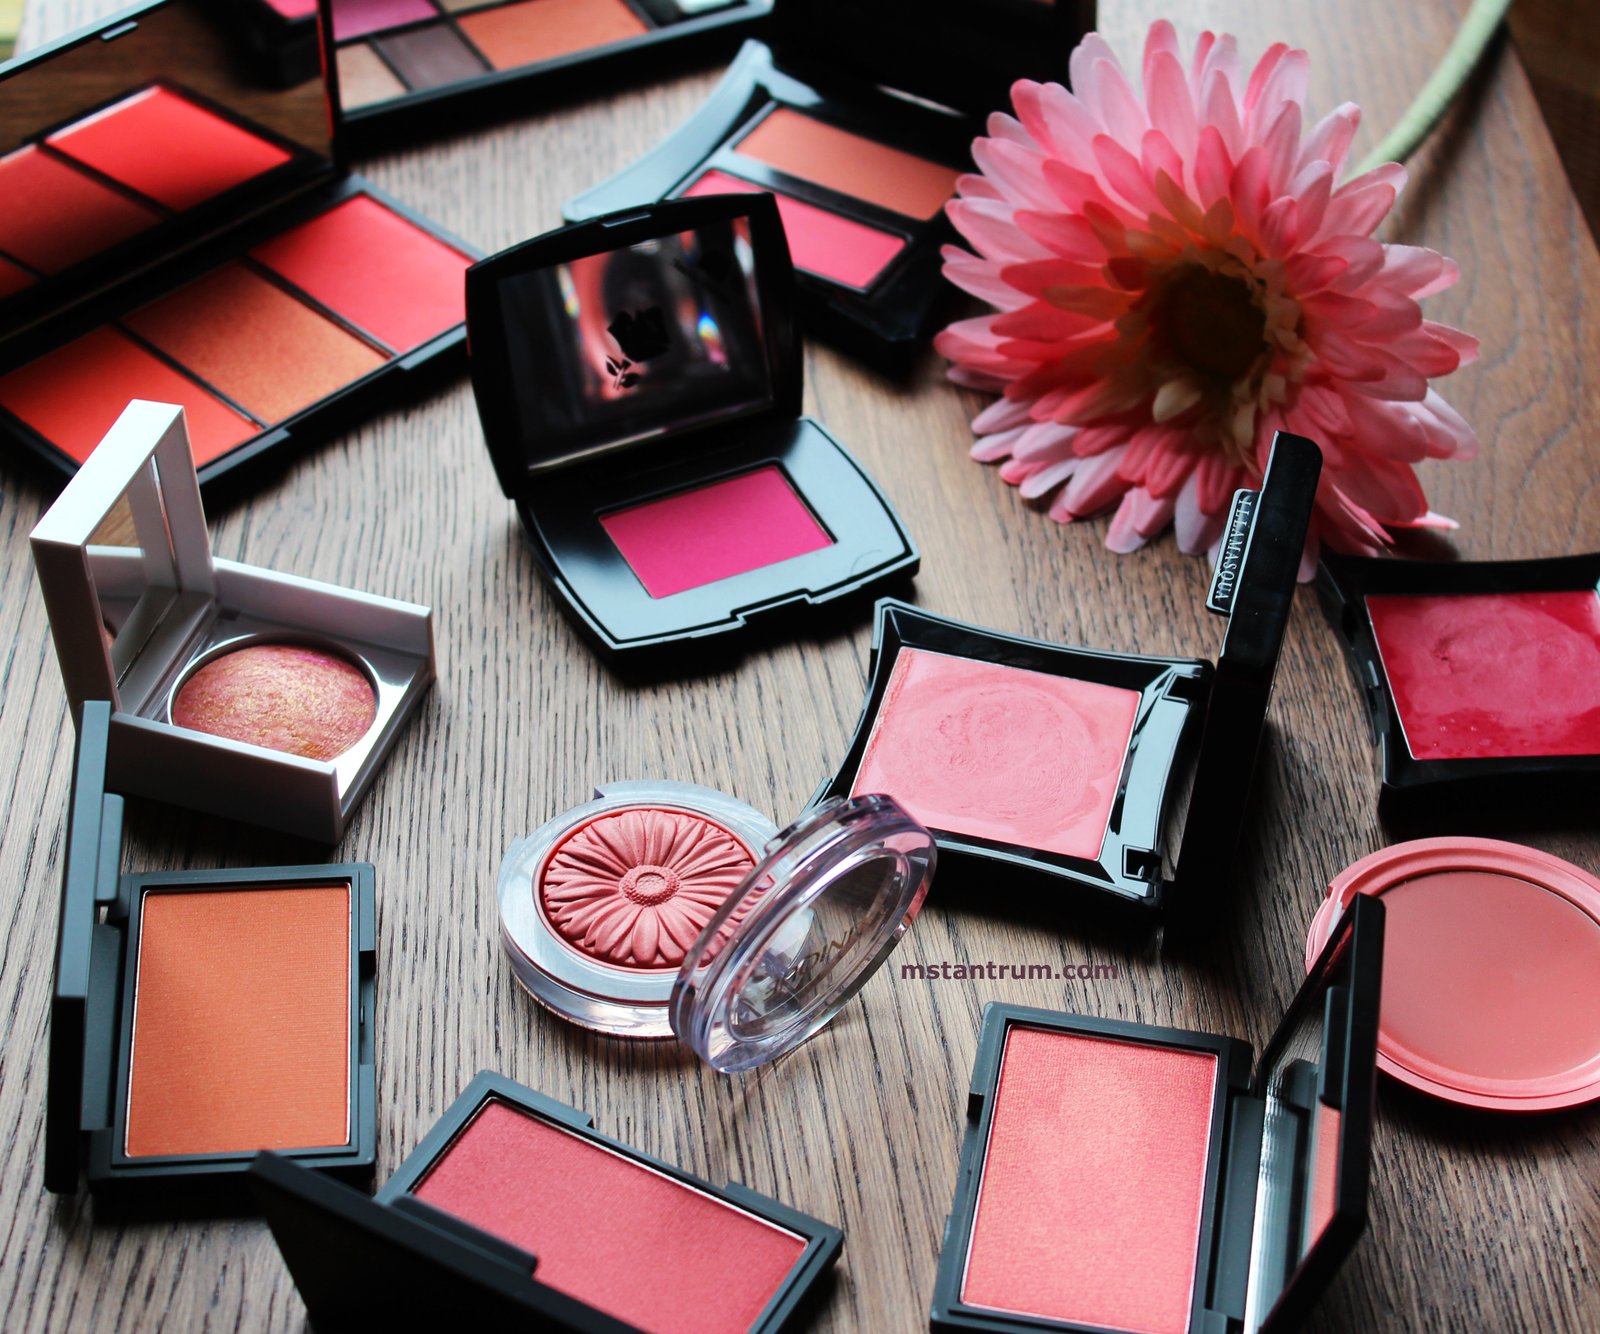 8 Best NARS Blushes for Natural Flush of Color on Your Cheeks